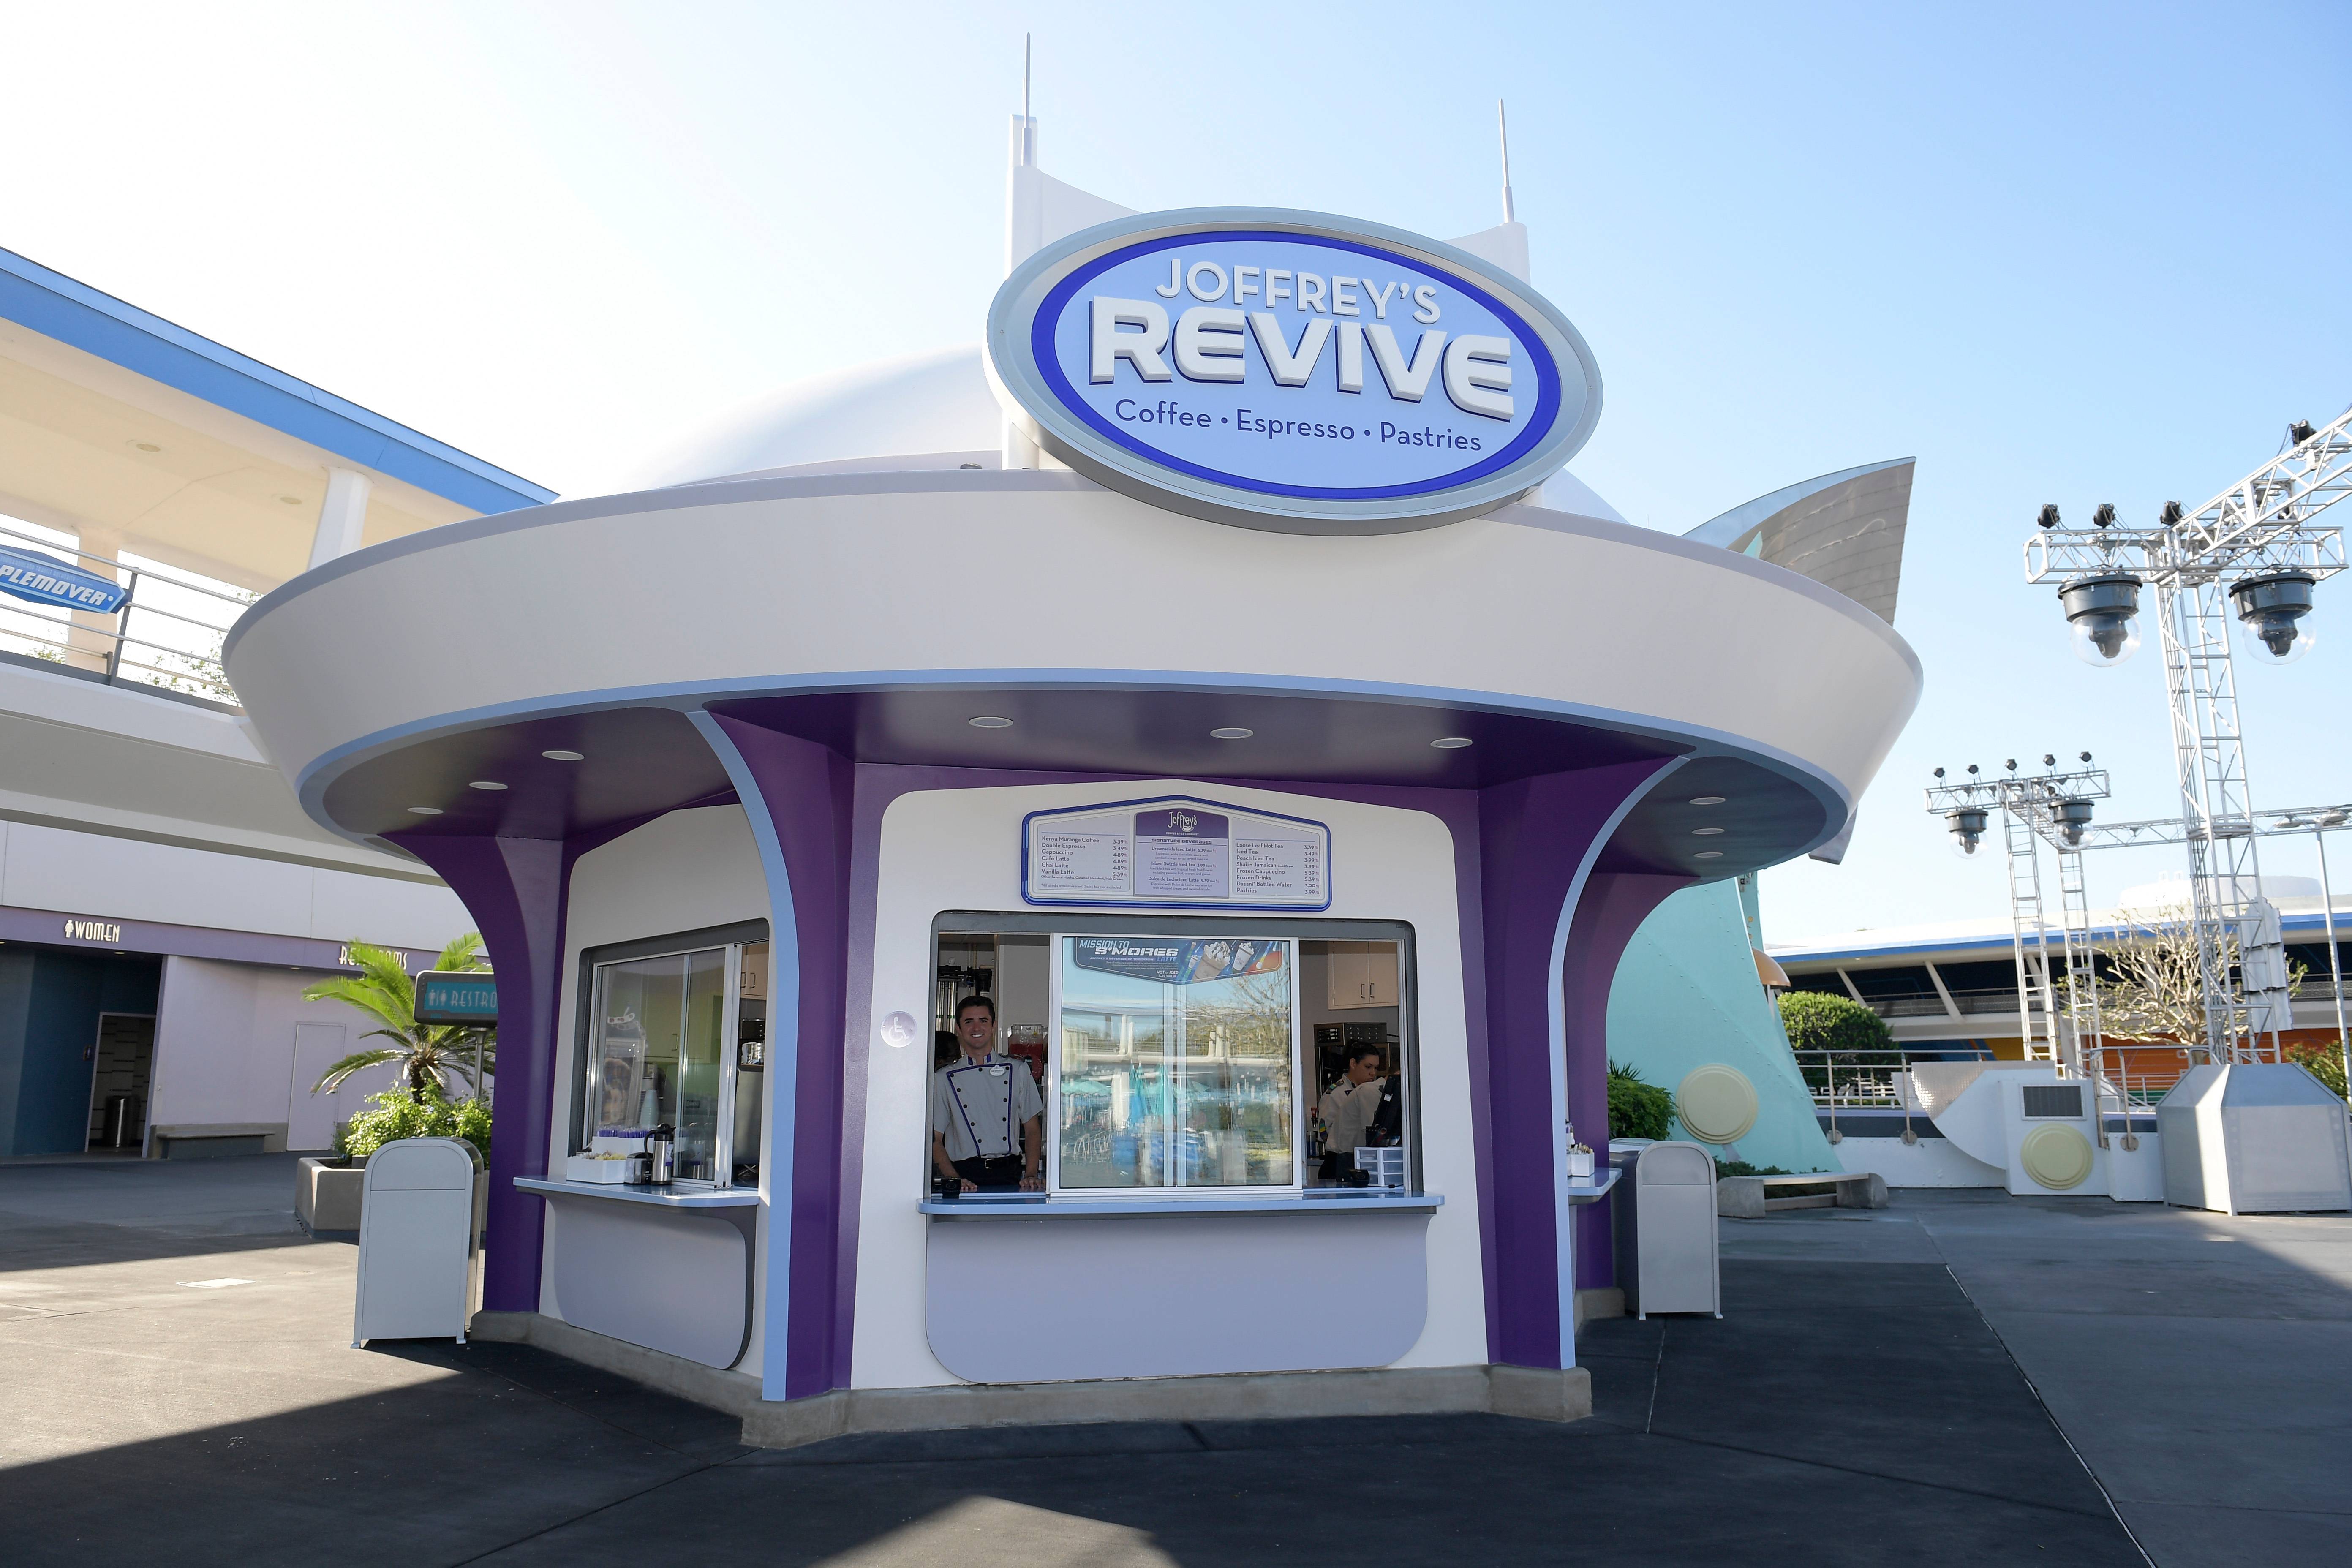 PHOTOS - Joffrey's Revive coffee kiosk now open in Tomorrowland at the Magic Kingdom